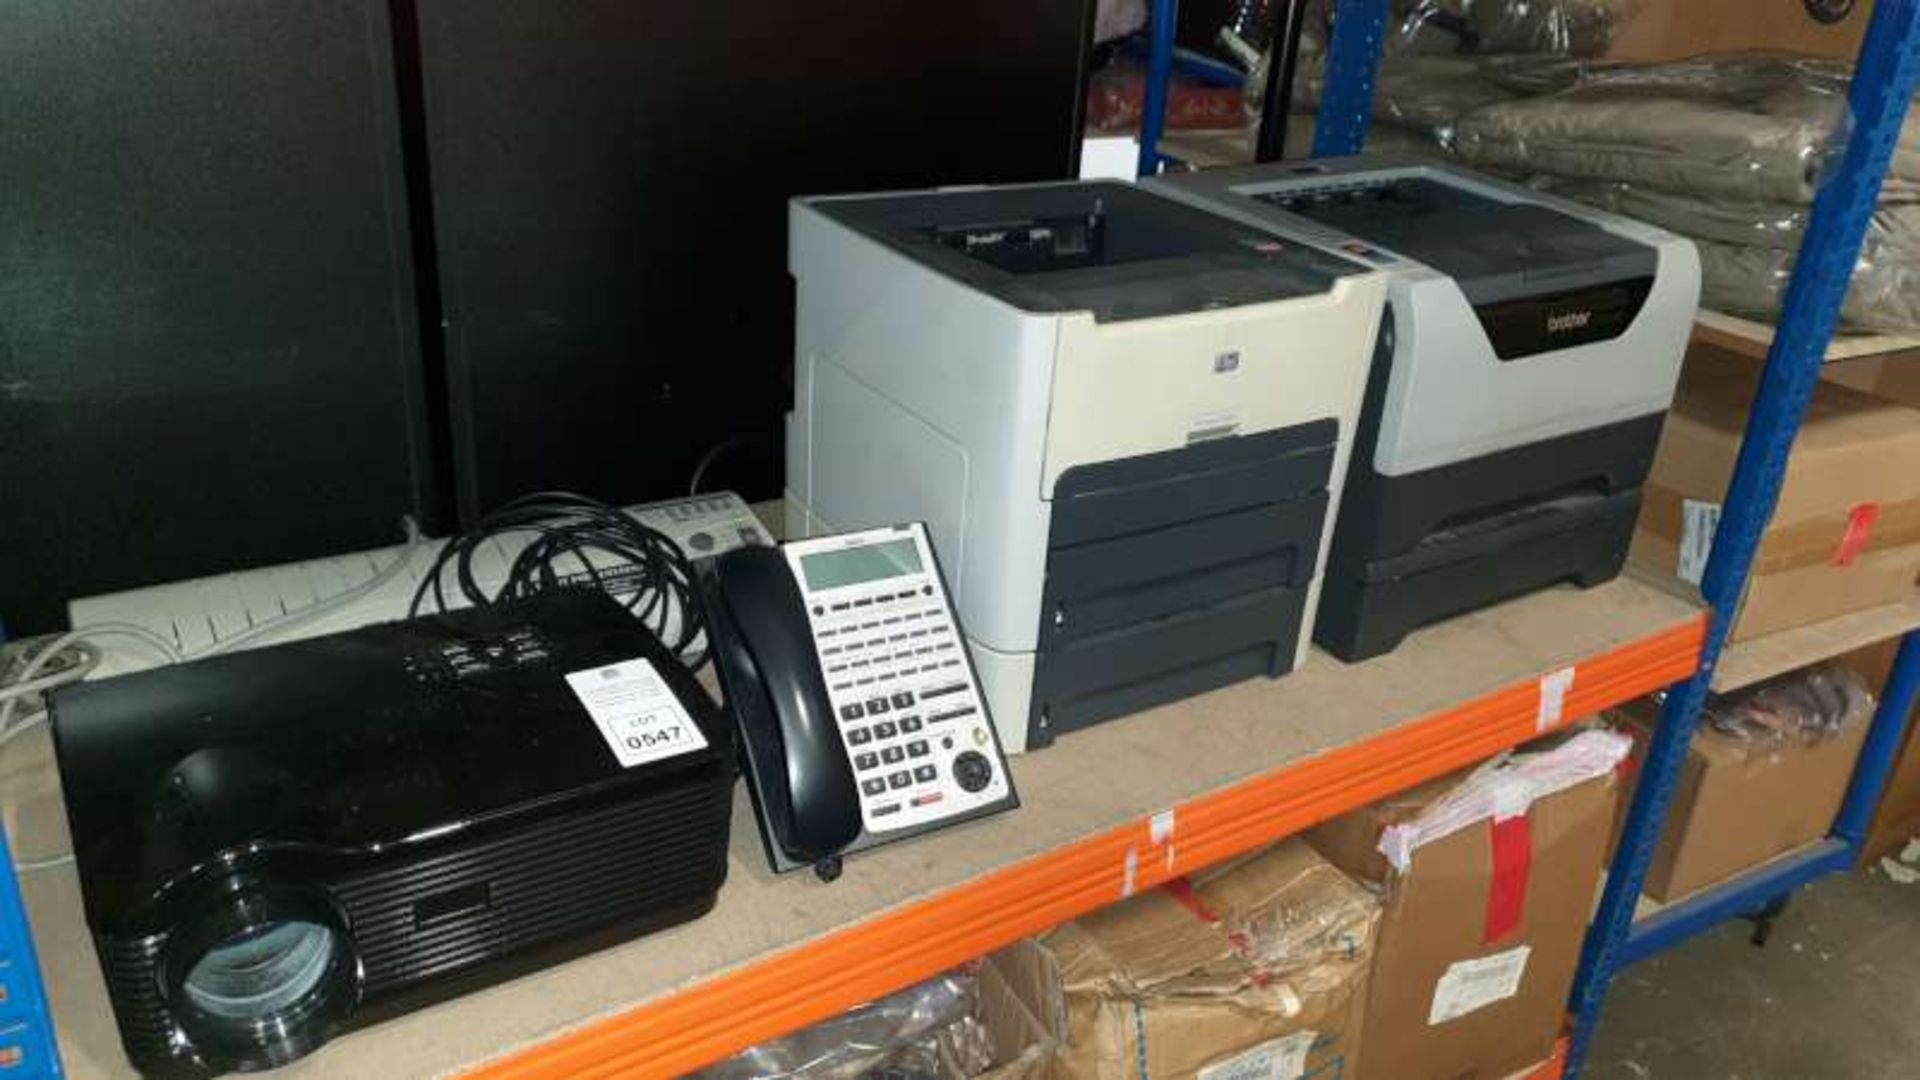 LOT CONTAINING HP AND BROTHER PRINTER, NEC OFFICE TELEPHONE, LAMINATOR, HD PROJECTOR